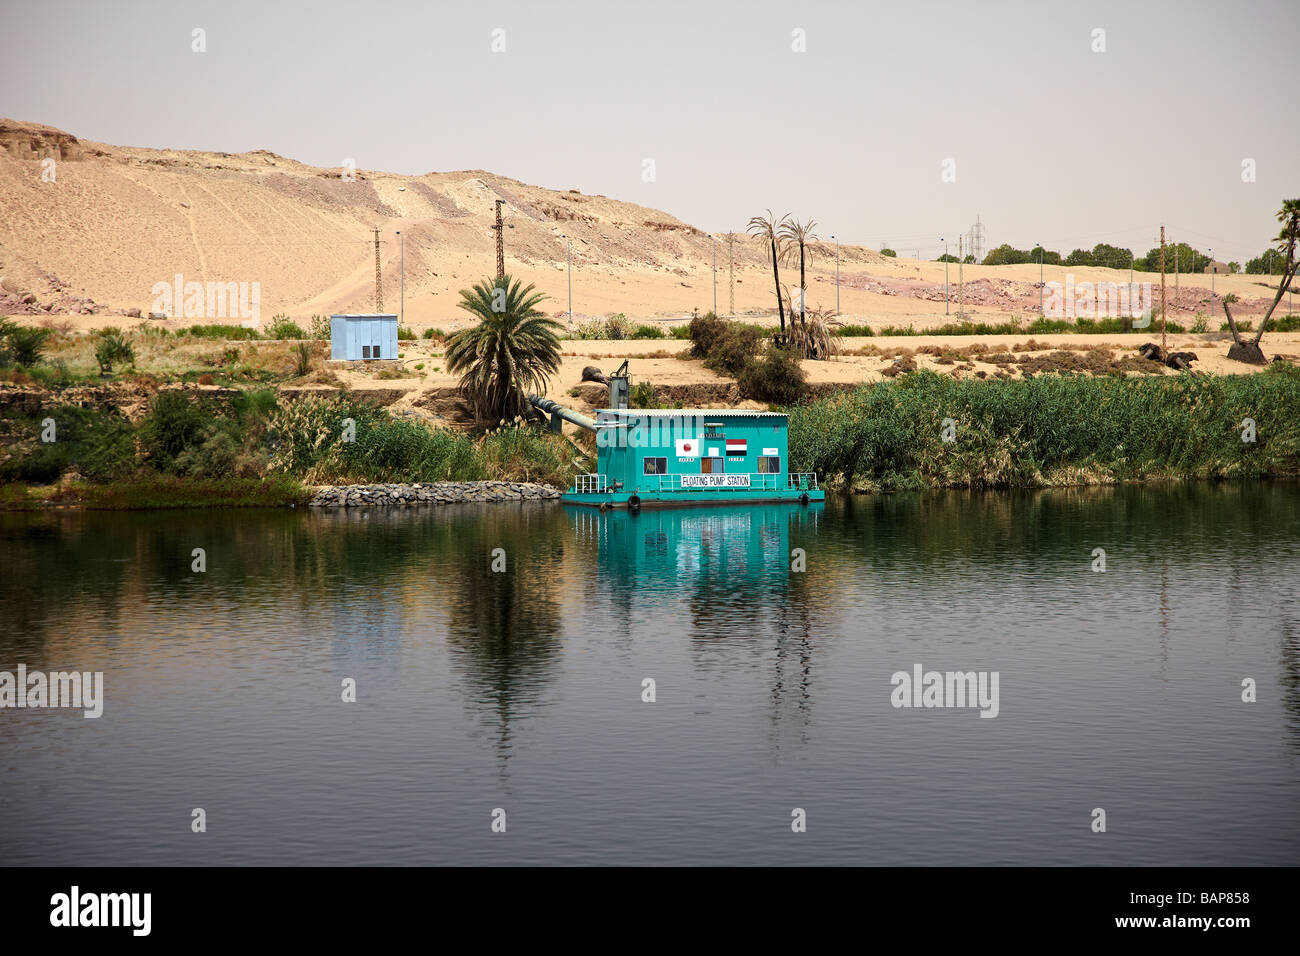 Floating Pumping Station on the River Nile, Egypt Stock Photo